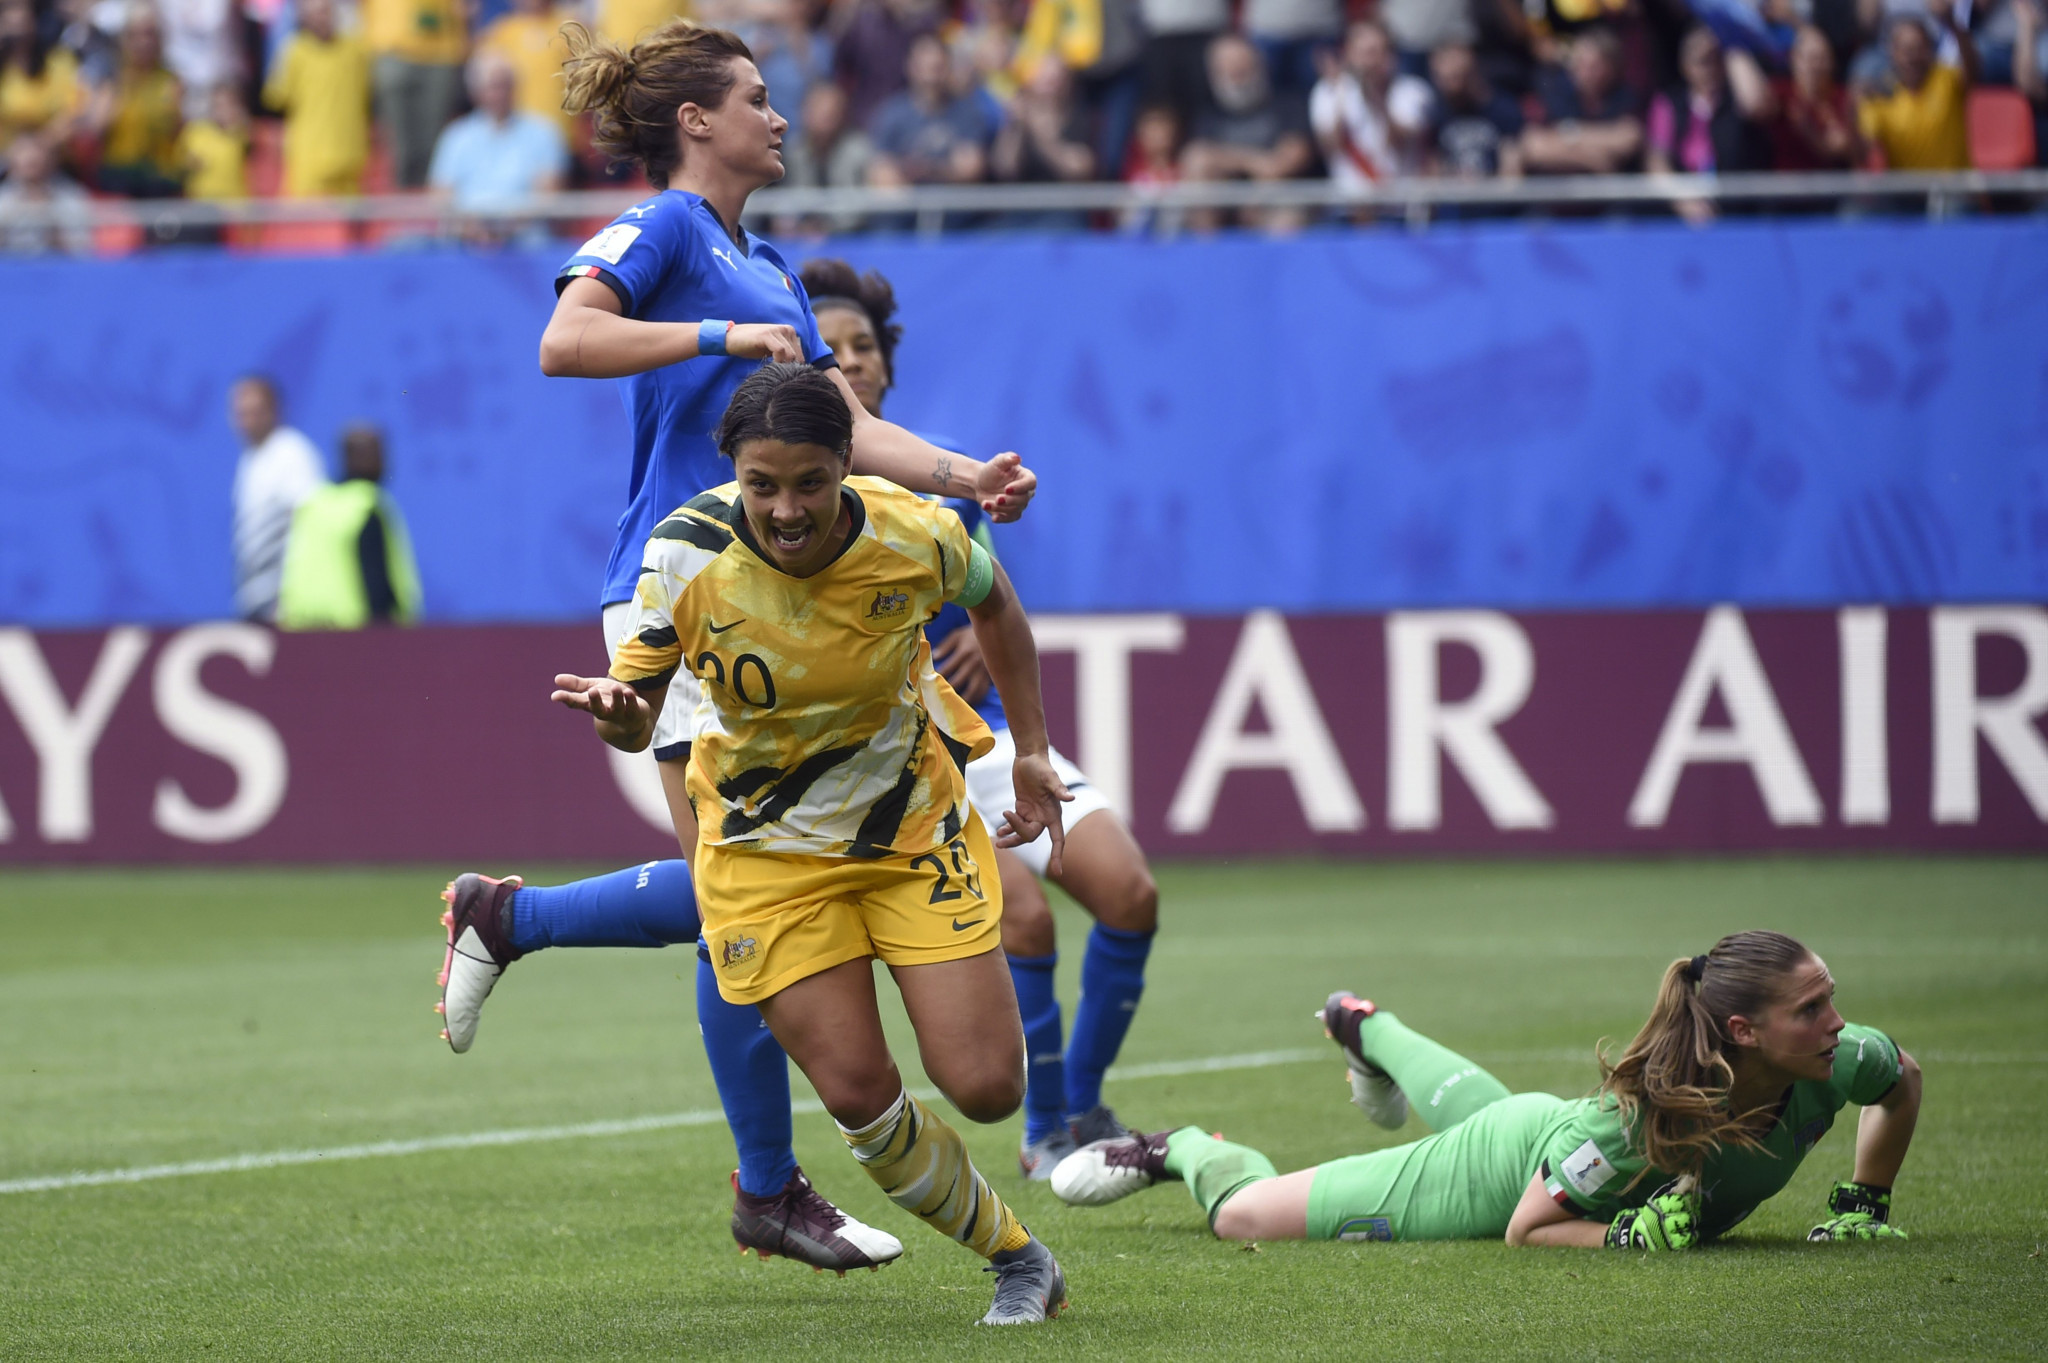 Italy upset Australia in FIFA Women's World Cup as Brazil and England record opening victories